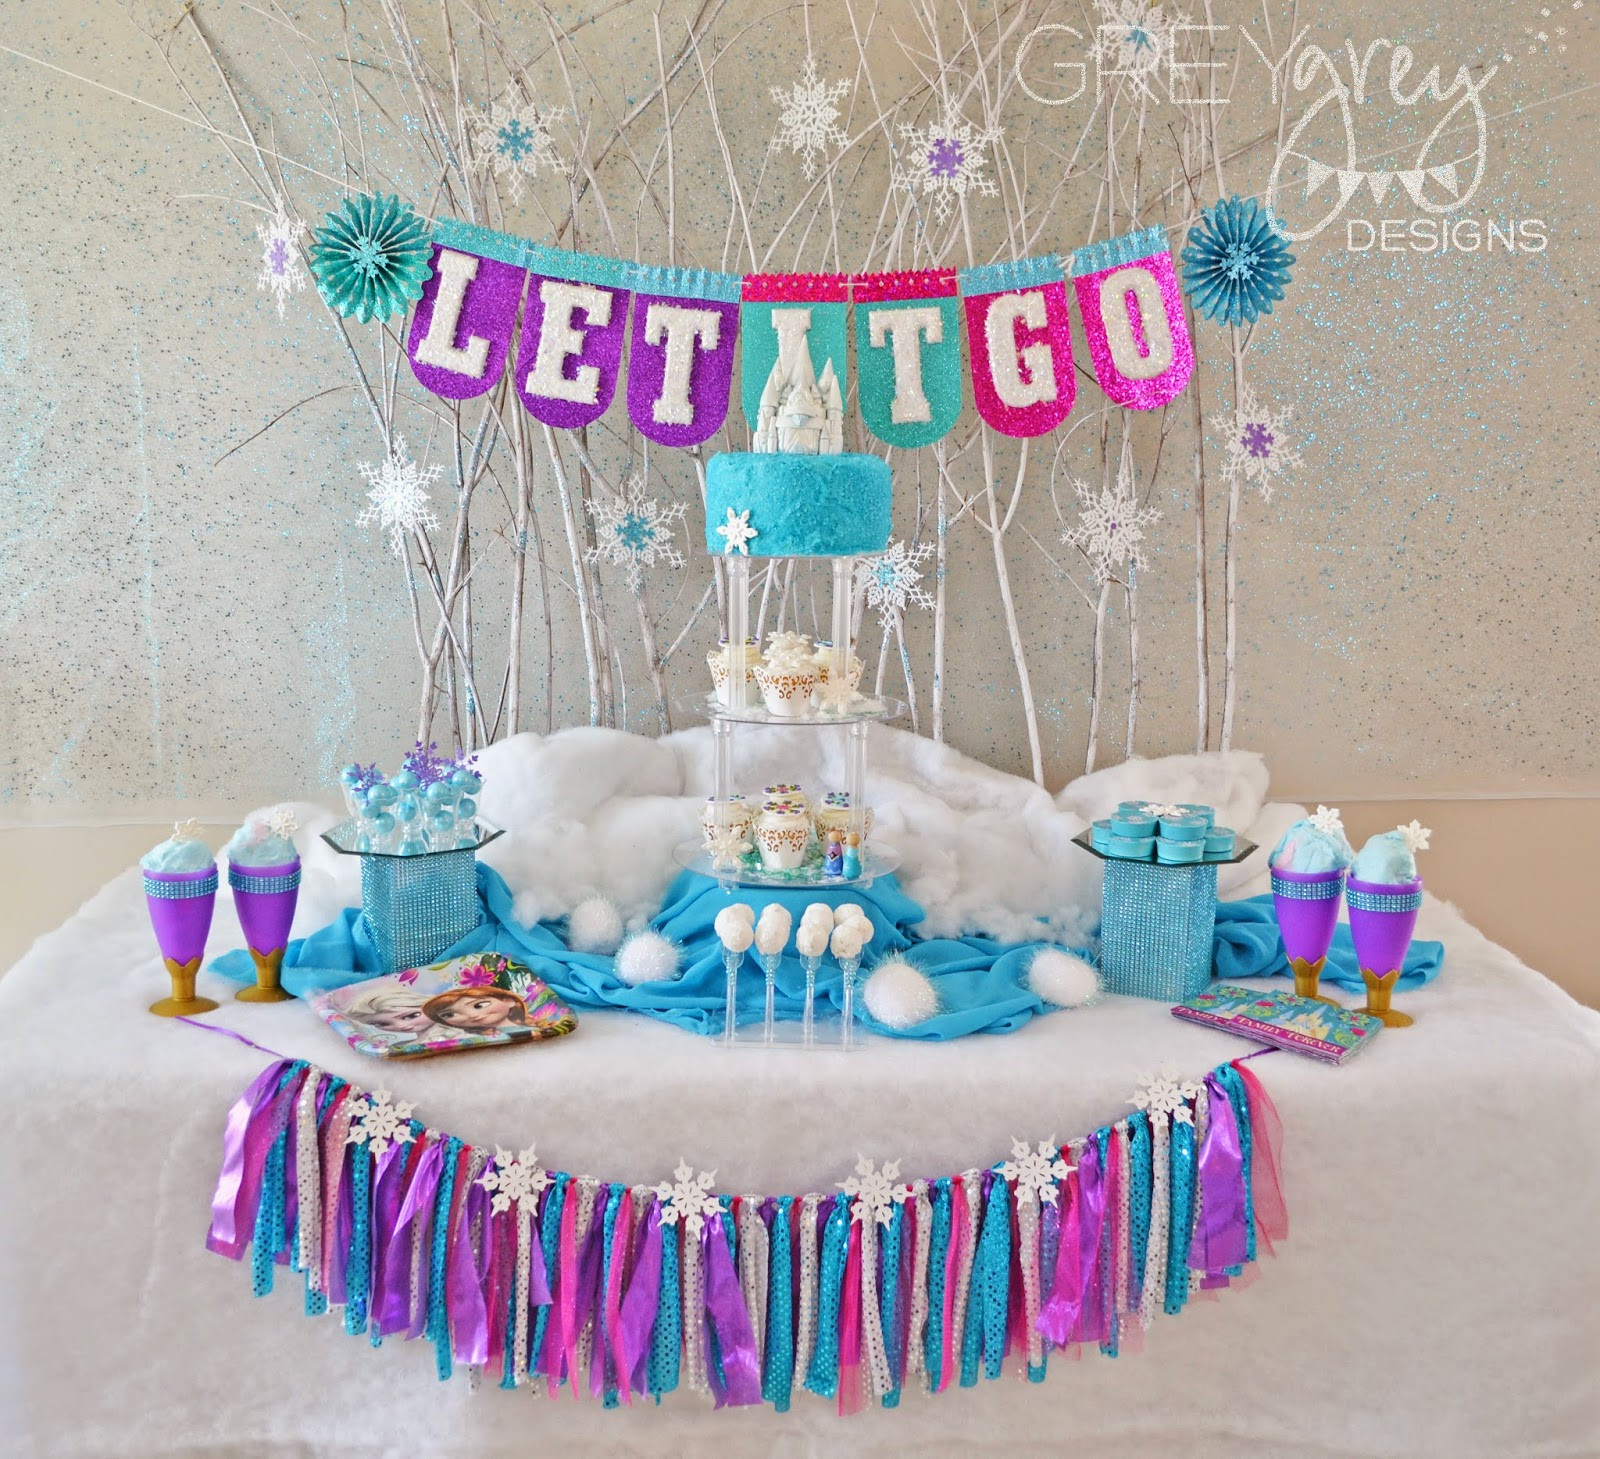 Frozen Decorations Birthday
 GreyGrey Designs Giveaway Frozen Birthday Party Pack for